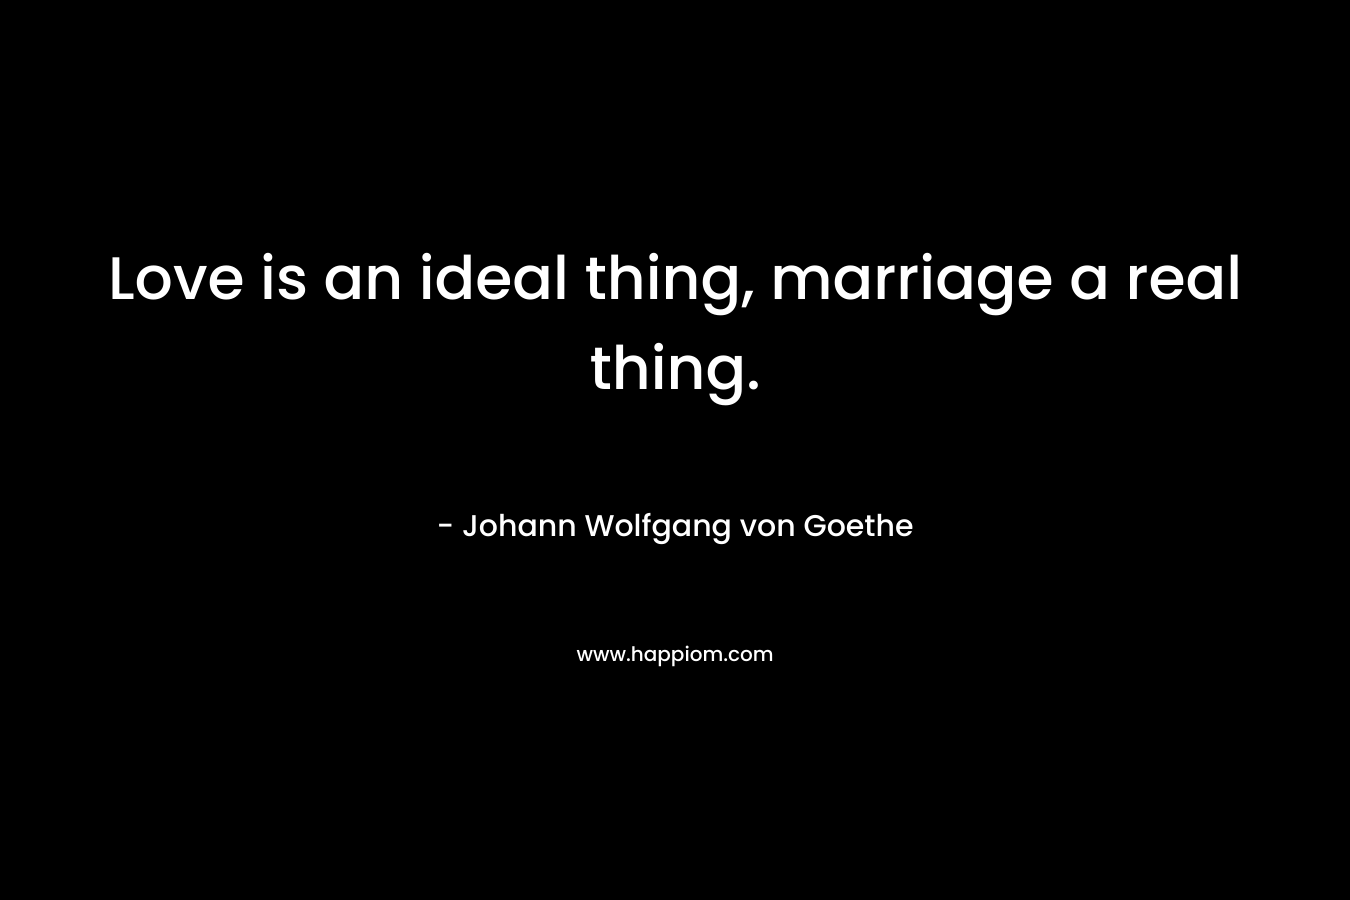 Love is an ideal thing, marriage a real thing.